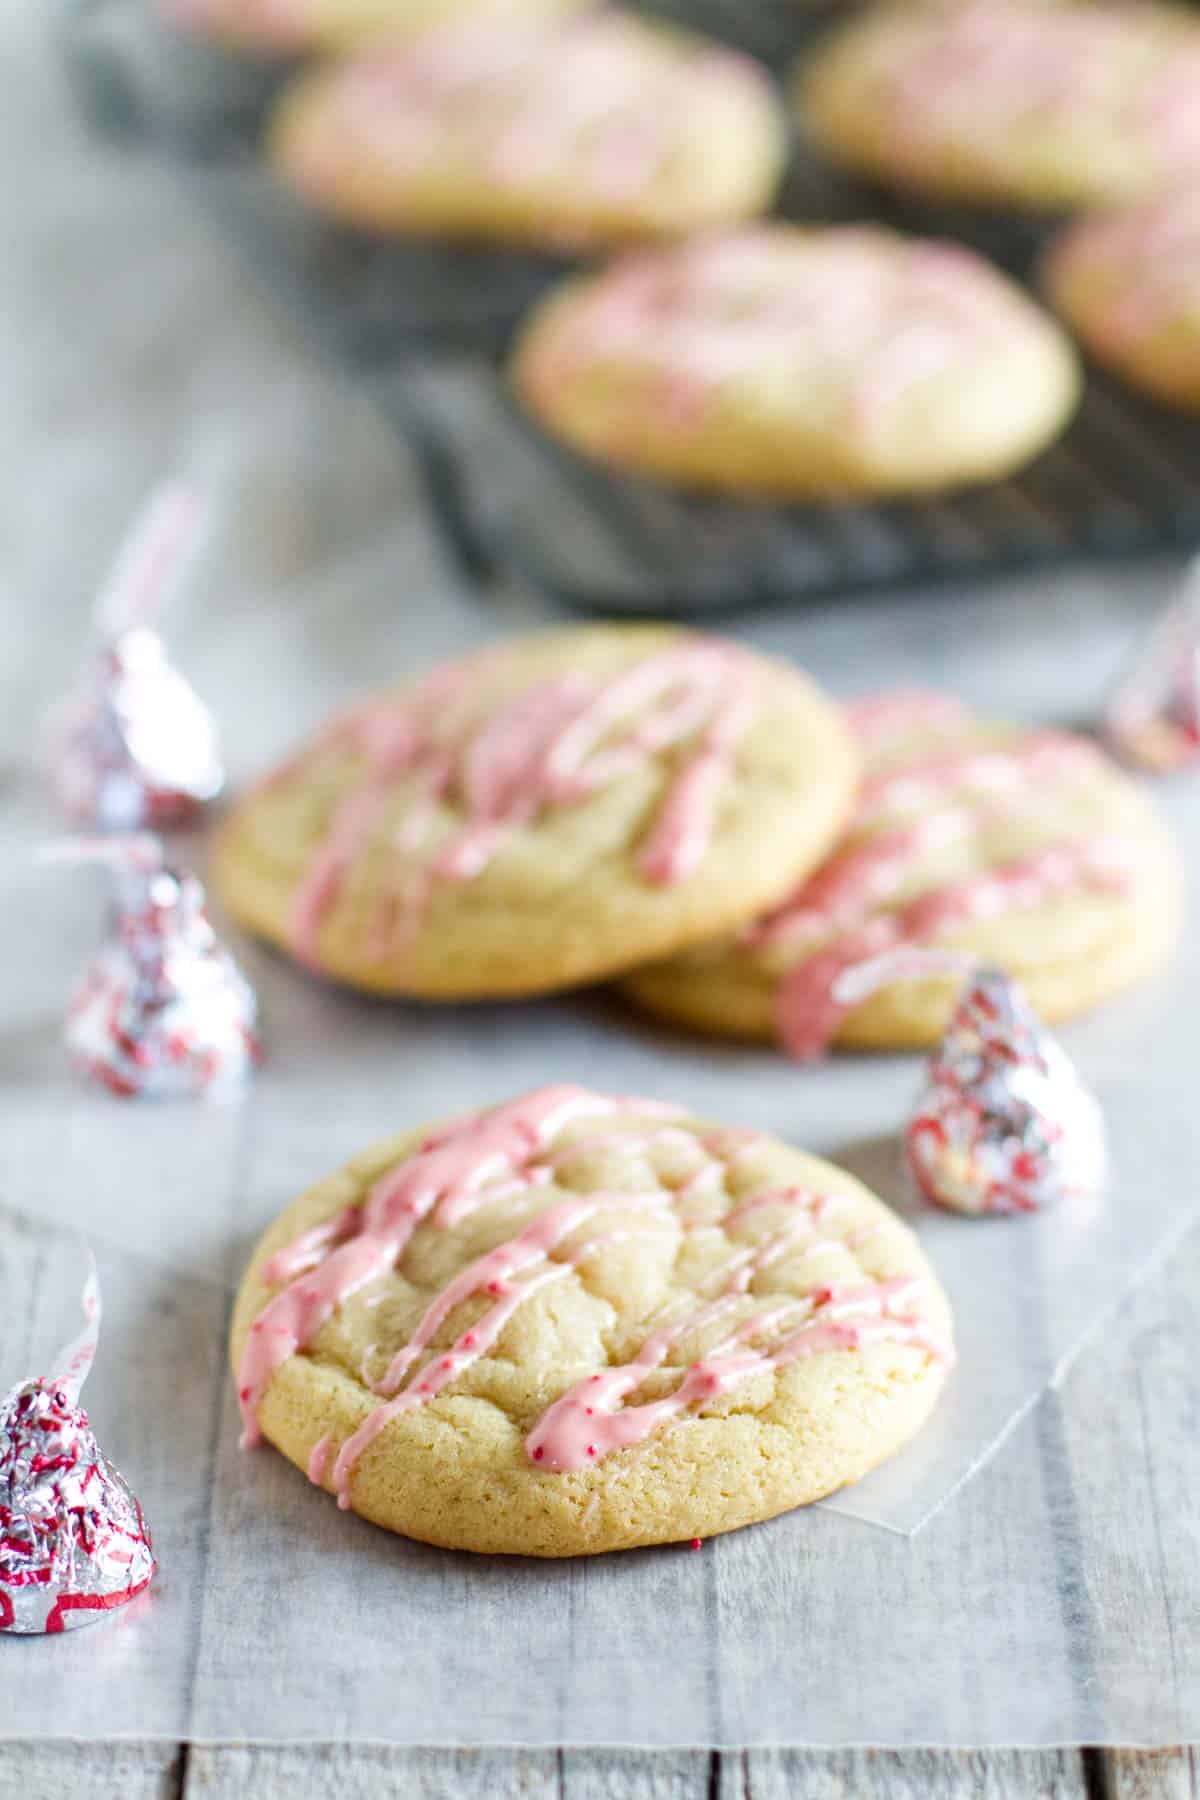 Candy Cane Kiss Stuffed Pudding Cookies with icing made from peppermint kisses.